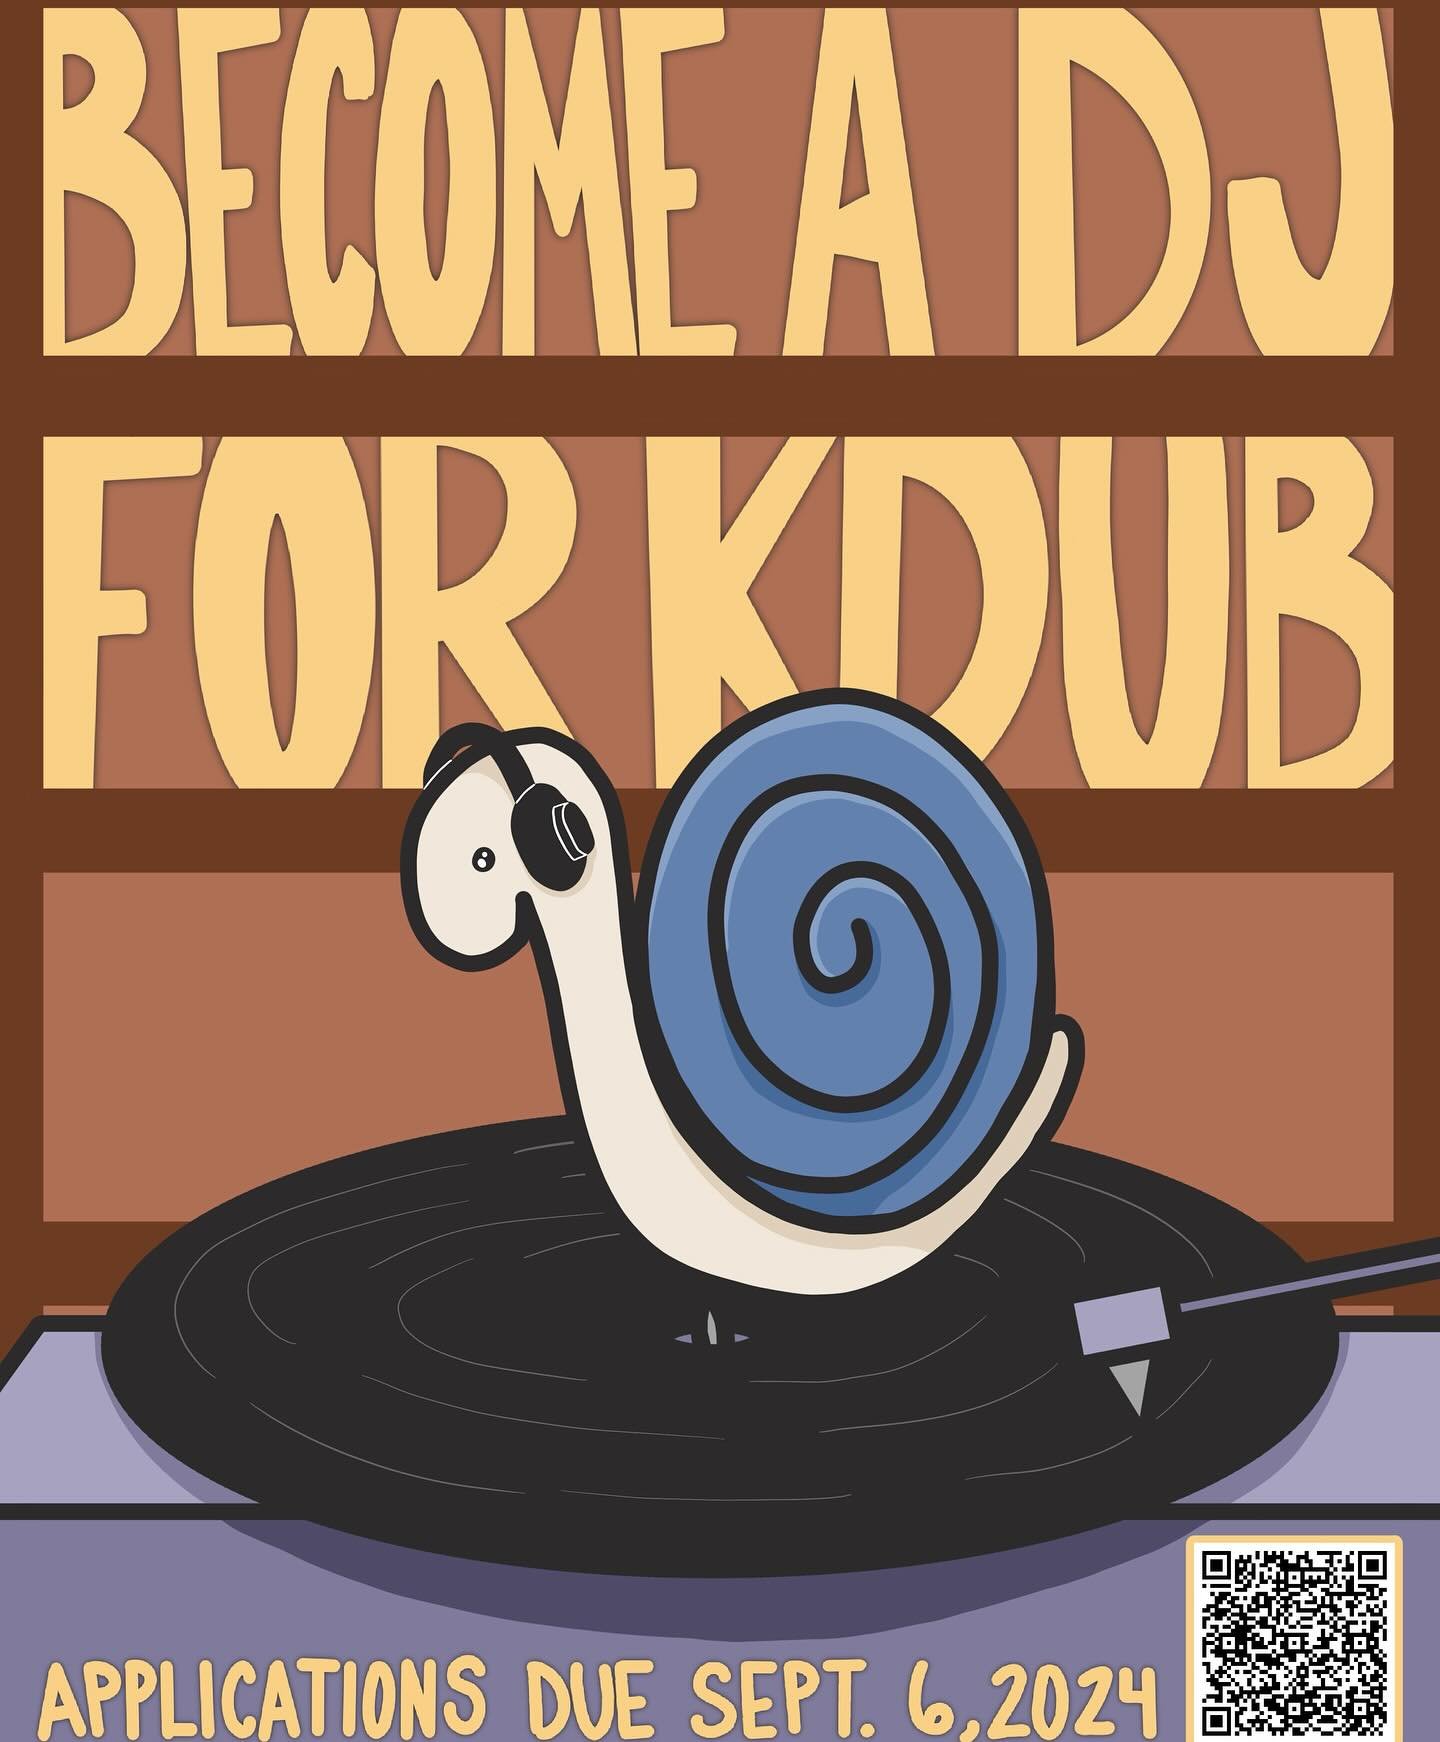 applications for being a dj in kwcw are open!! sign up if u r interested in sharing music, opinions, jokes, and more !!